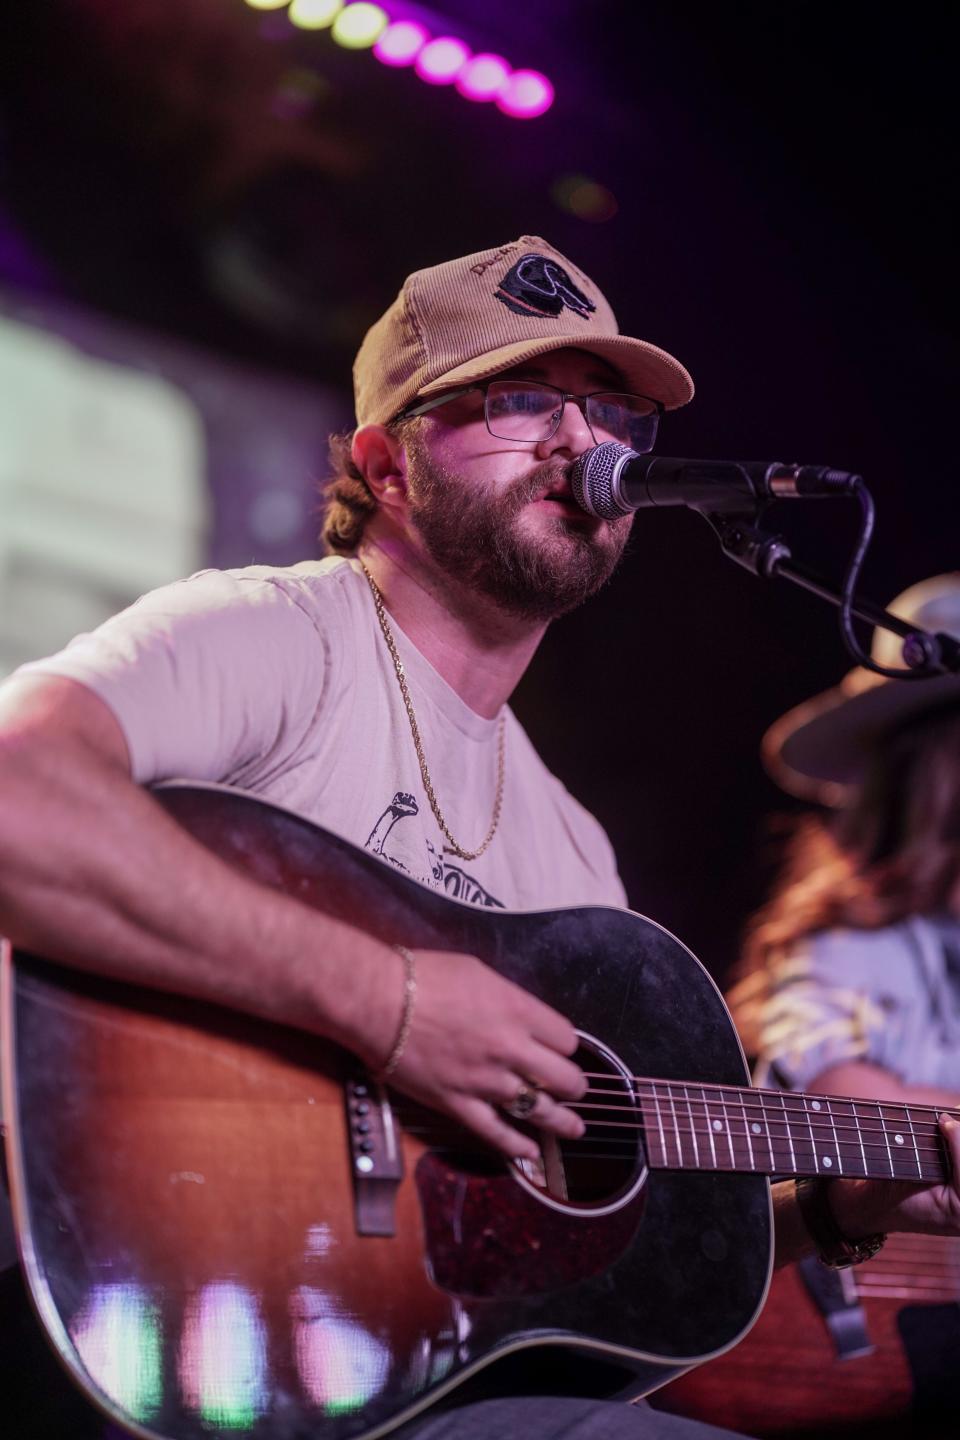 Since moving to Nashville in 2020, Lakeland's McCoy Moore has written songs for SMACKsongs country artists such as Shane Profitt, Bryce Mauldin and Jon Wood. In addition, he’s released five original songs on streaming sites, including his latest singles “Driveway,” released in 2021 and “Beer on Out,” released in 2022.